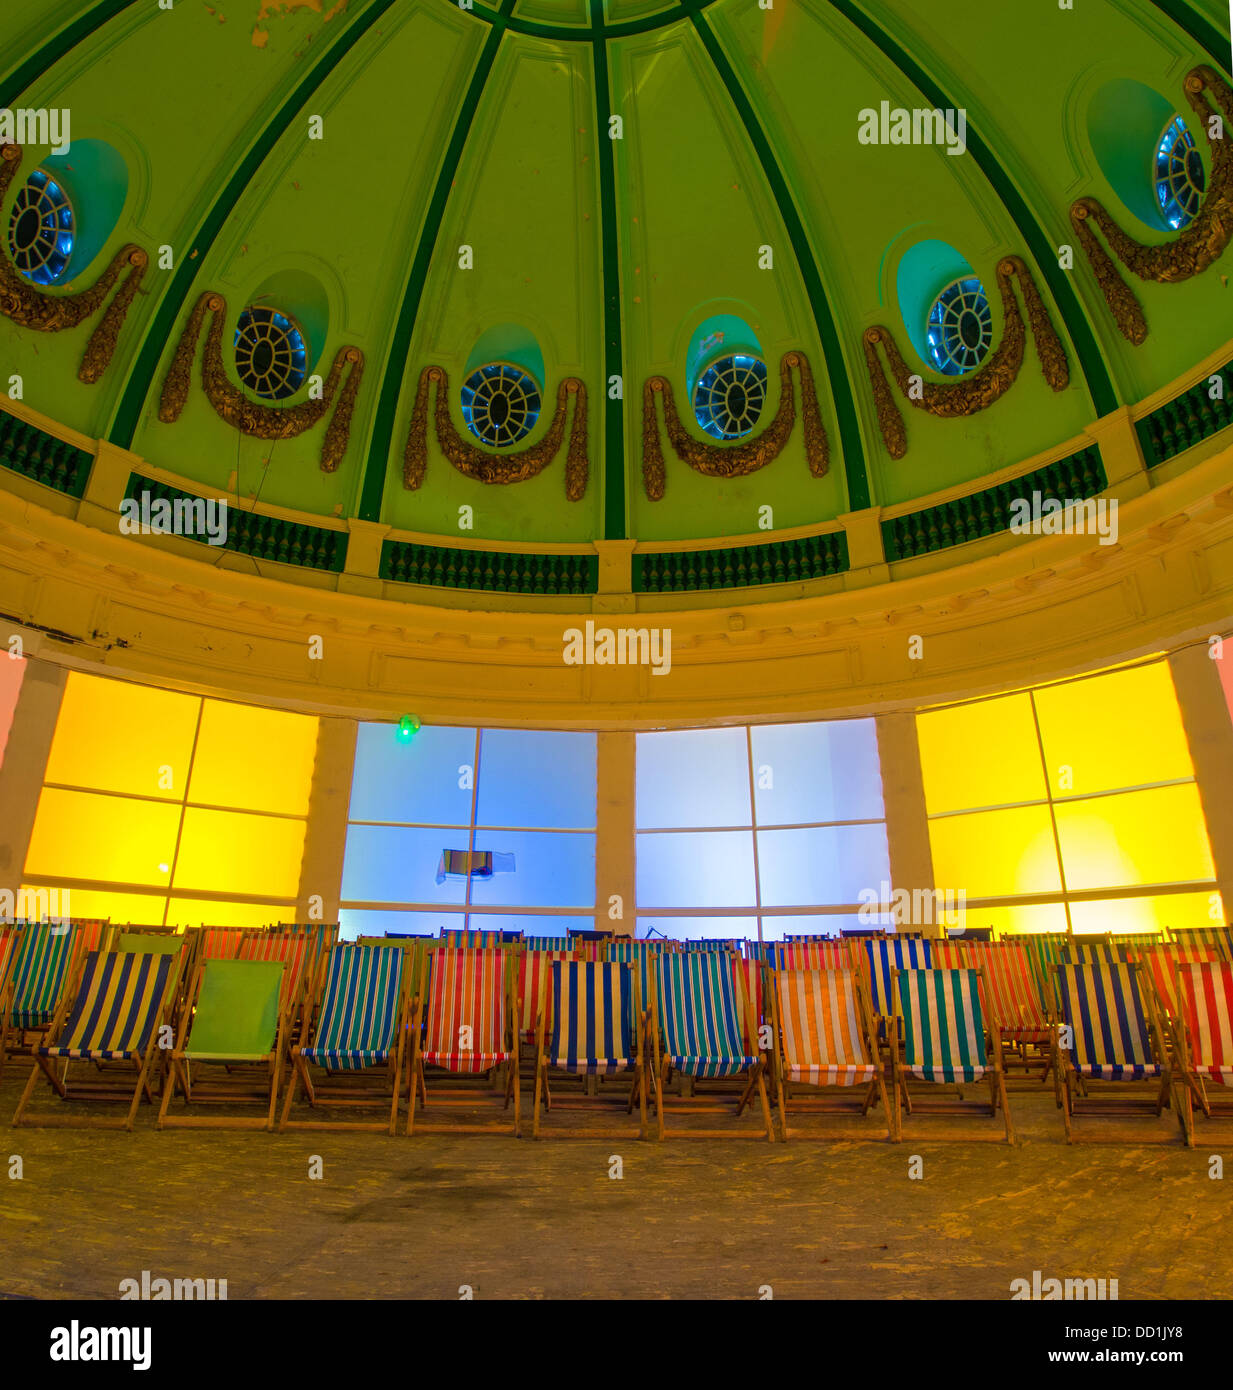 Whitley Bay, UK. 22nd Aug, 2013. Whitley Bay Film Festival 2013 transform the interior of The Spanish City Dome at Whitley Bay into a multiplex cinemna with deckchairs as seats. Events run until 5th September 2013. Credit:  Bailey-Cooper Photography/Alamy Live News Stock Photo